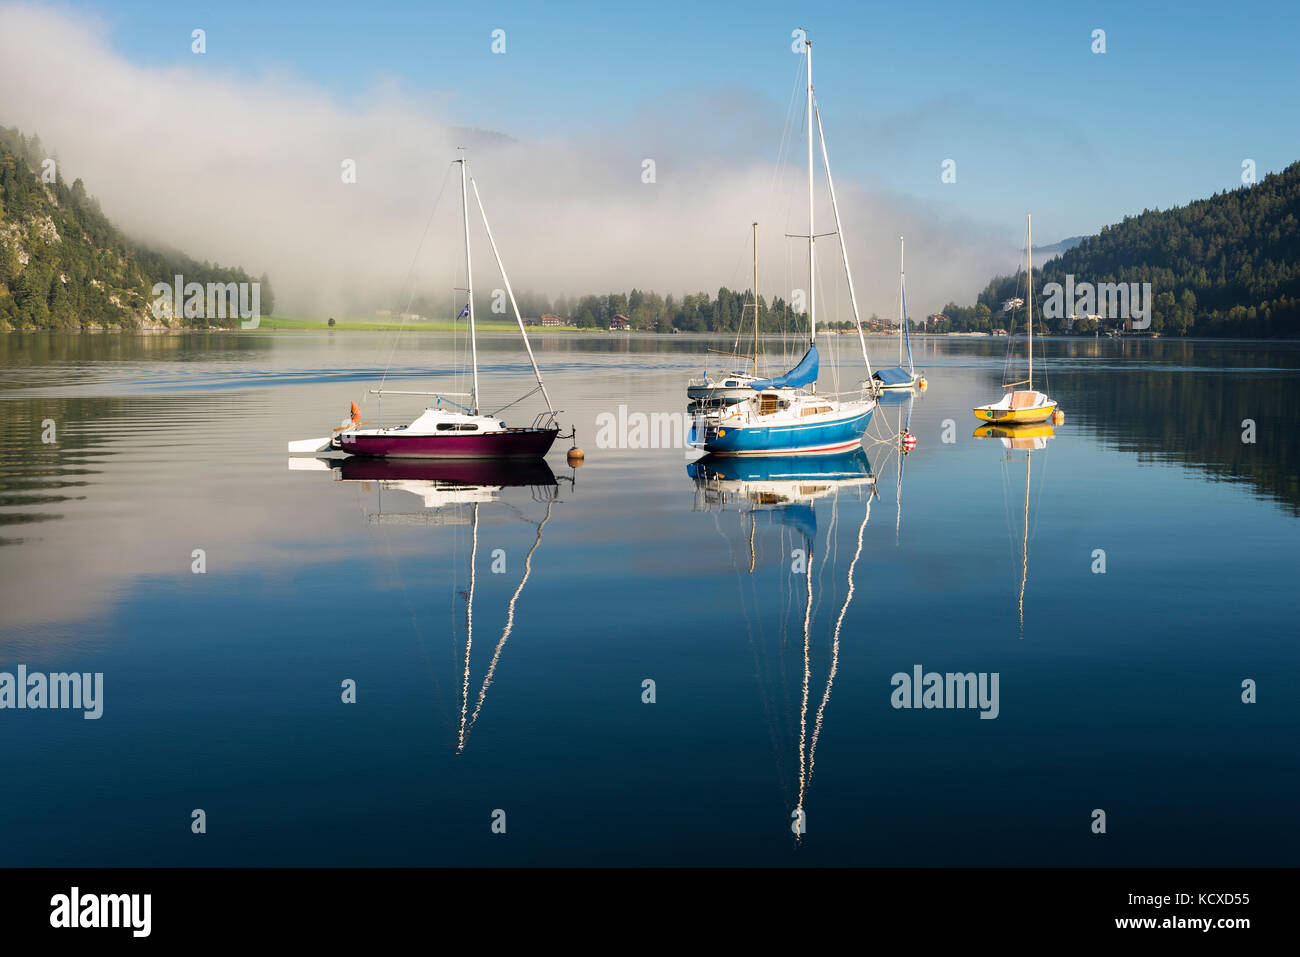 Mist, mountains, sailing boats and yachts in the morning sun reflected in the calm surface of the Lake Achensee in autumn, Tyrol, Austria Stock Photo